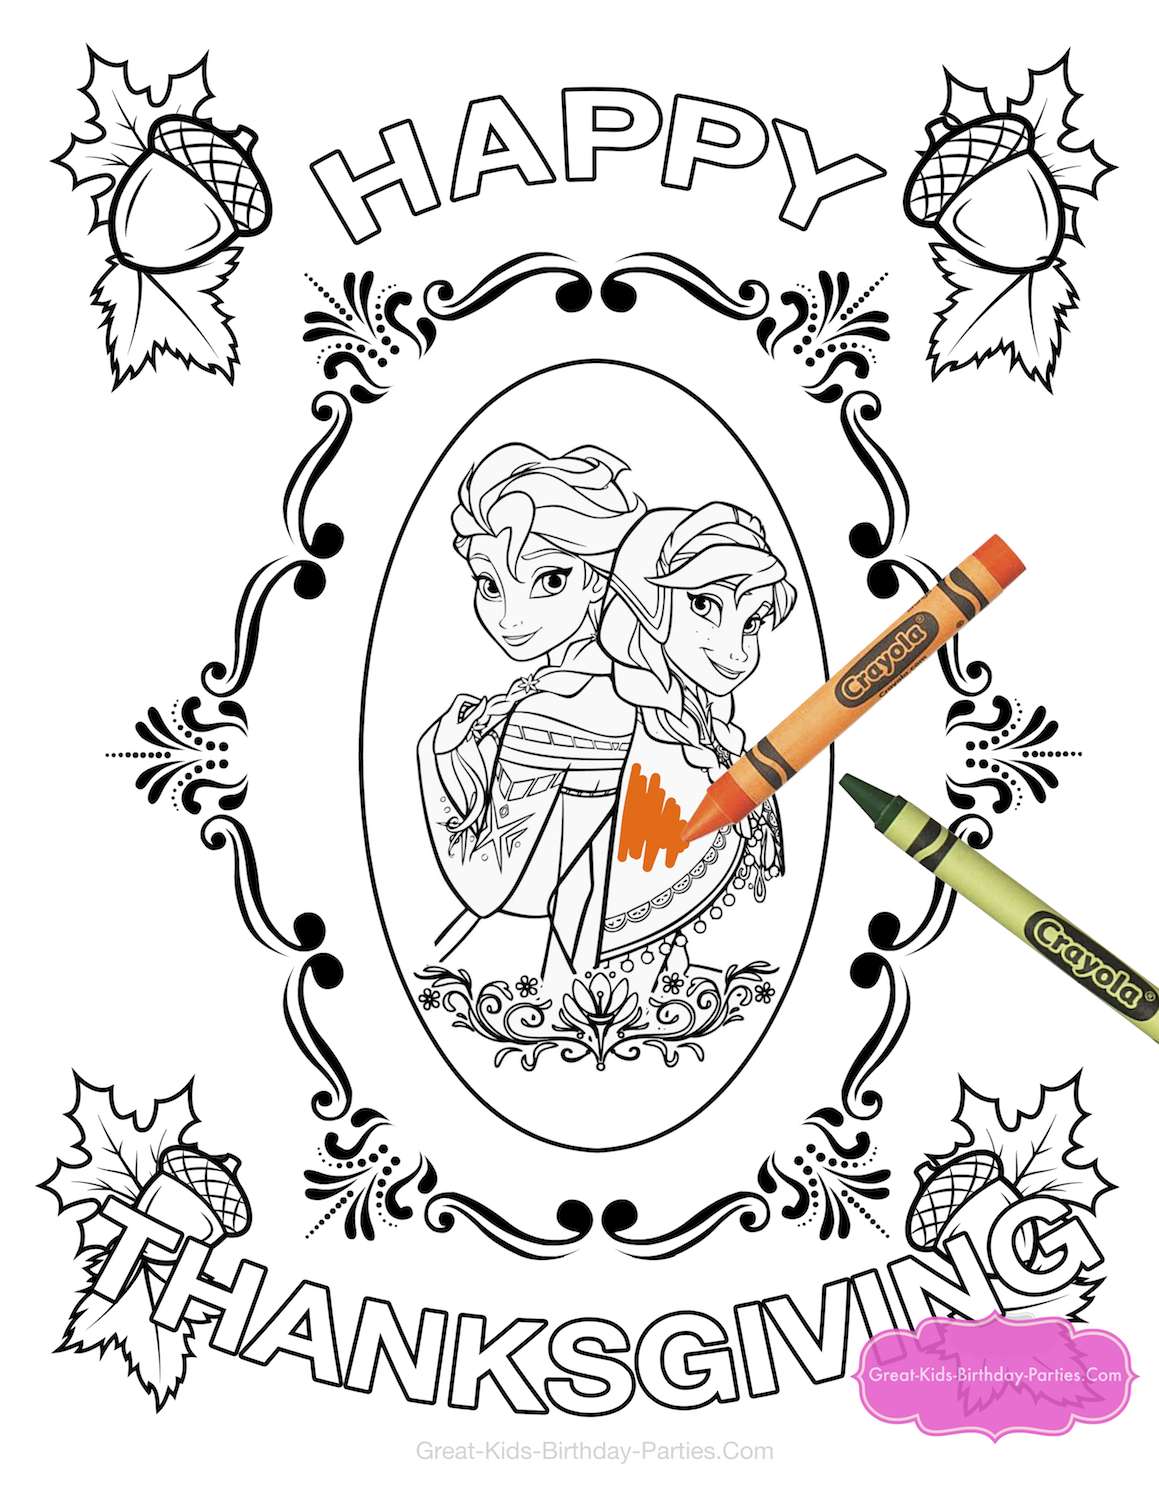 among us thanksgiving coloring pages